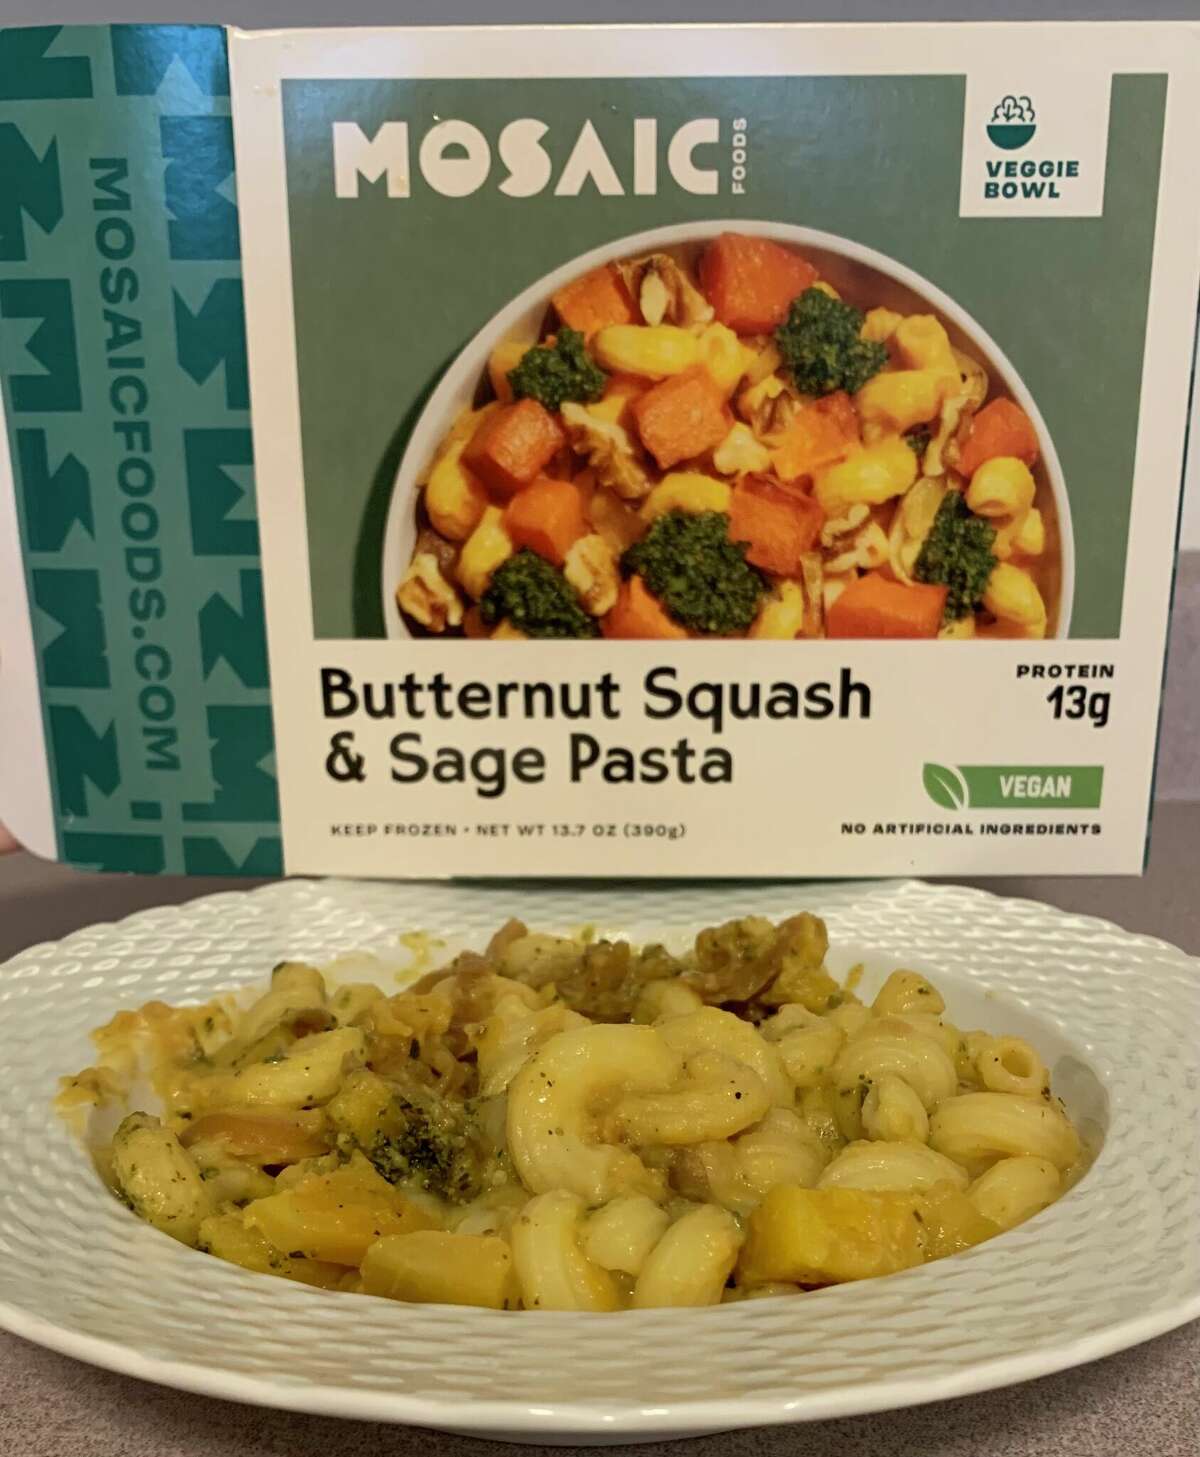 Butternut Squash & Sage Past from Mosaic